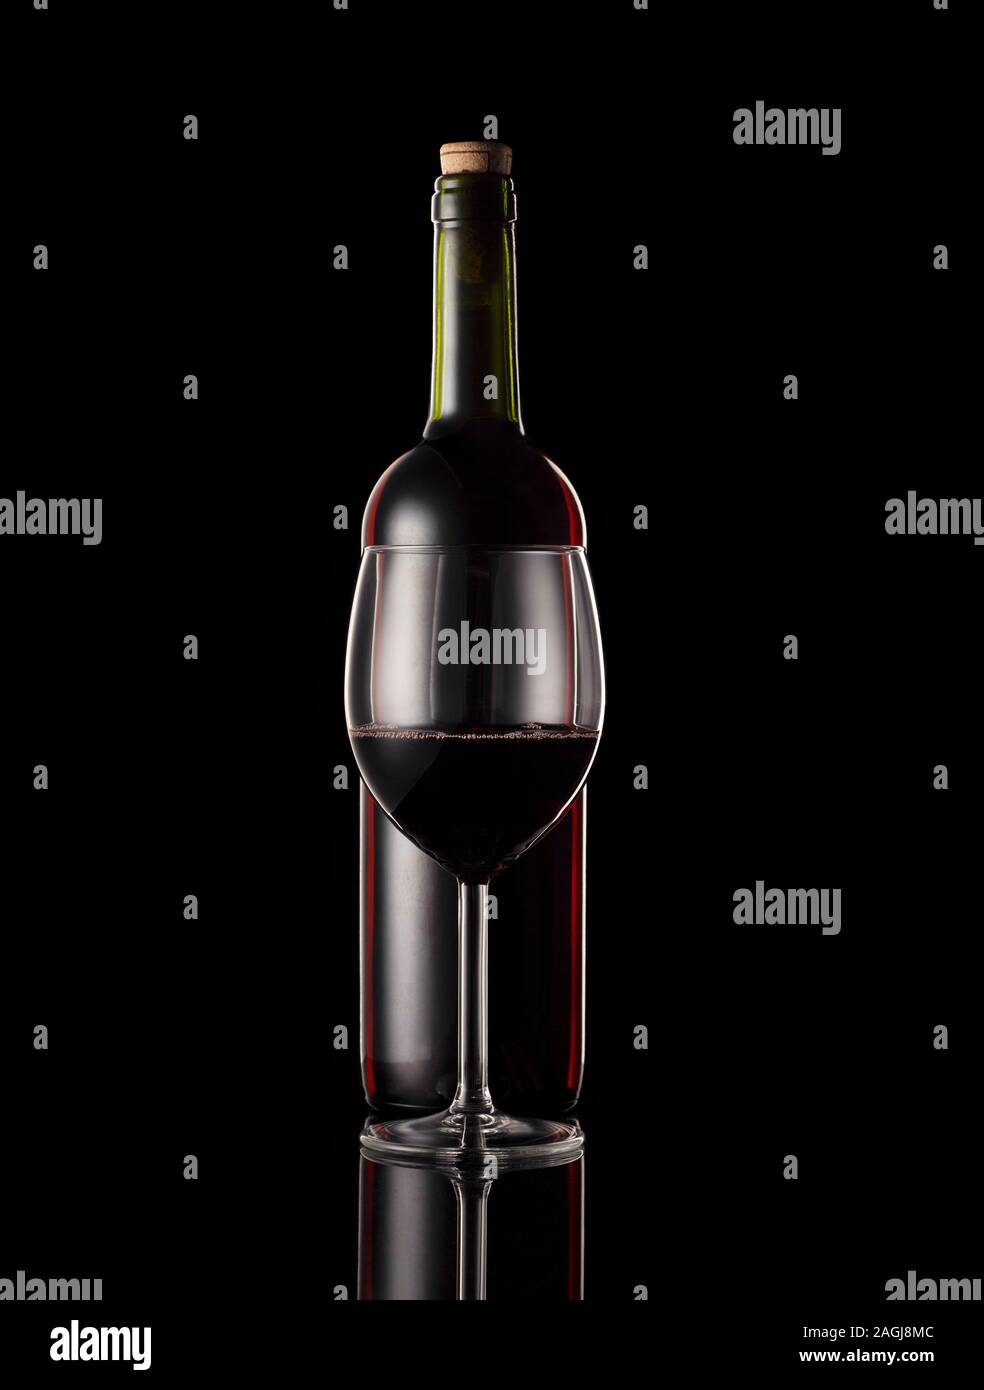 Red wine bottle and glass with black background and rim lighting. Stock Photo